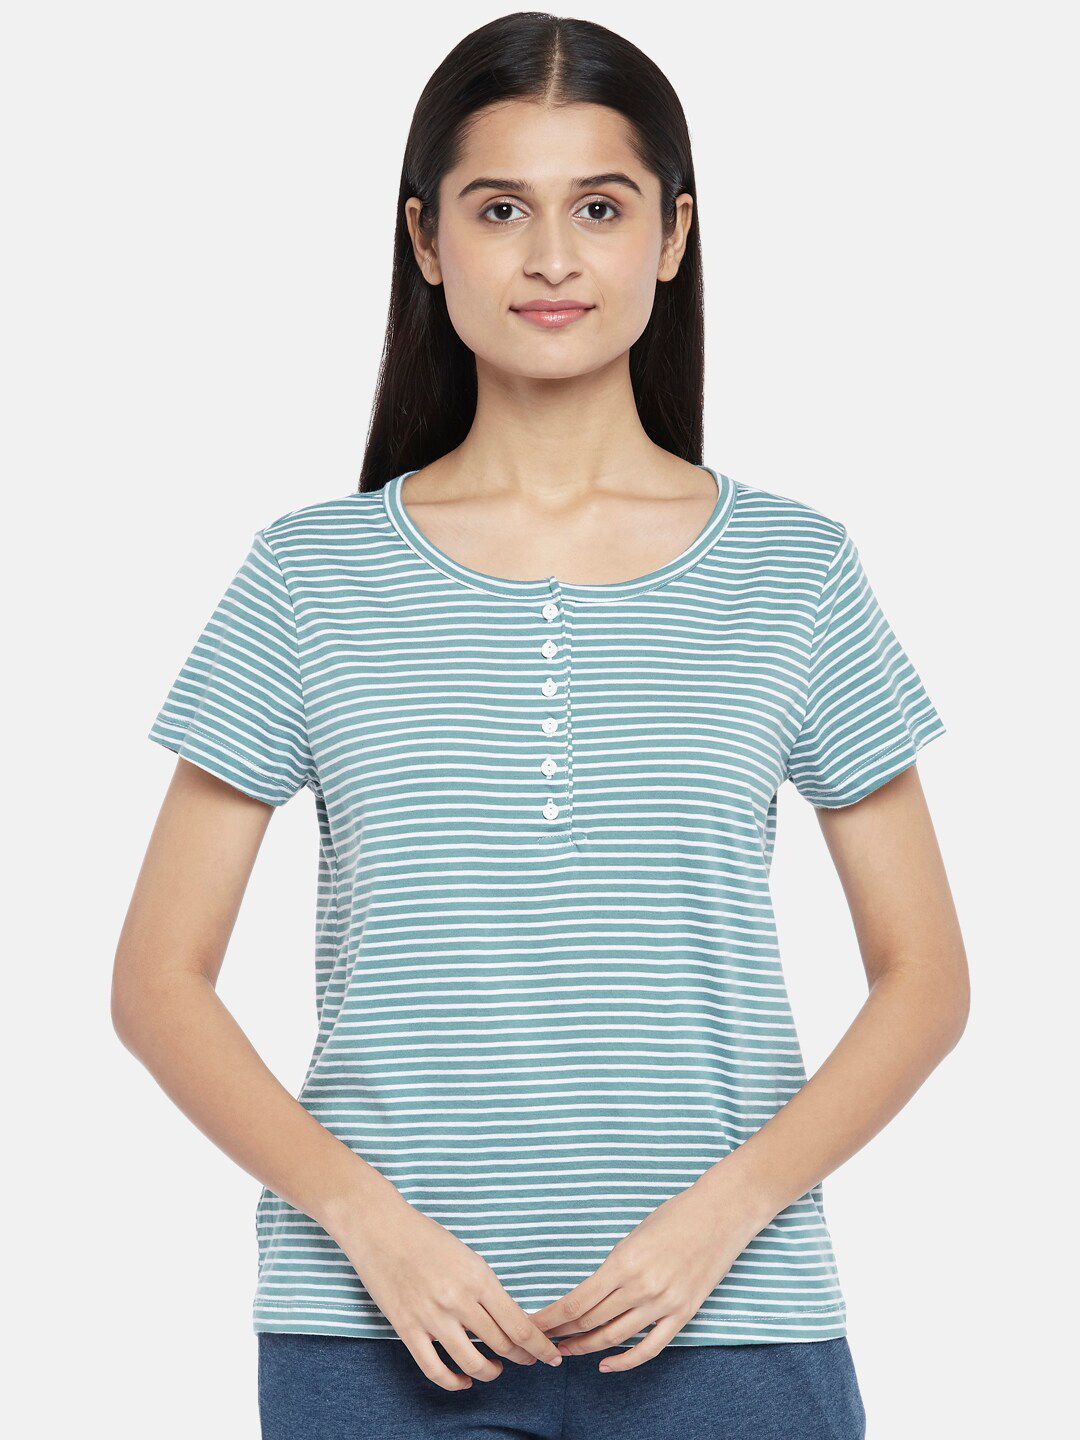 Dreamz by Pantaloons Teal Striped Round Neck Lounge tshirt Price in India